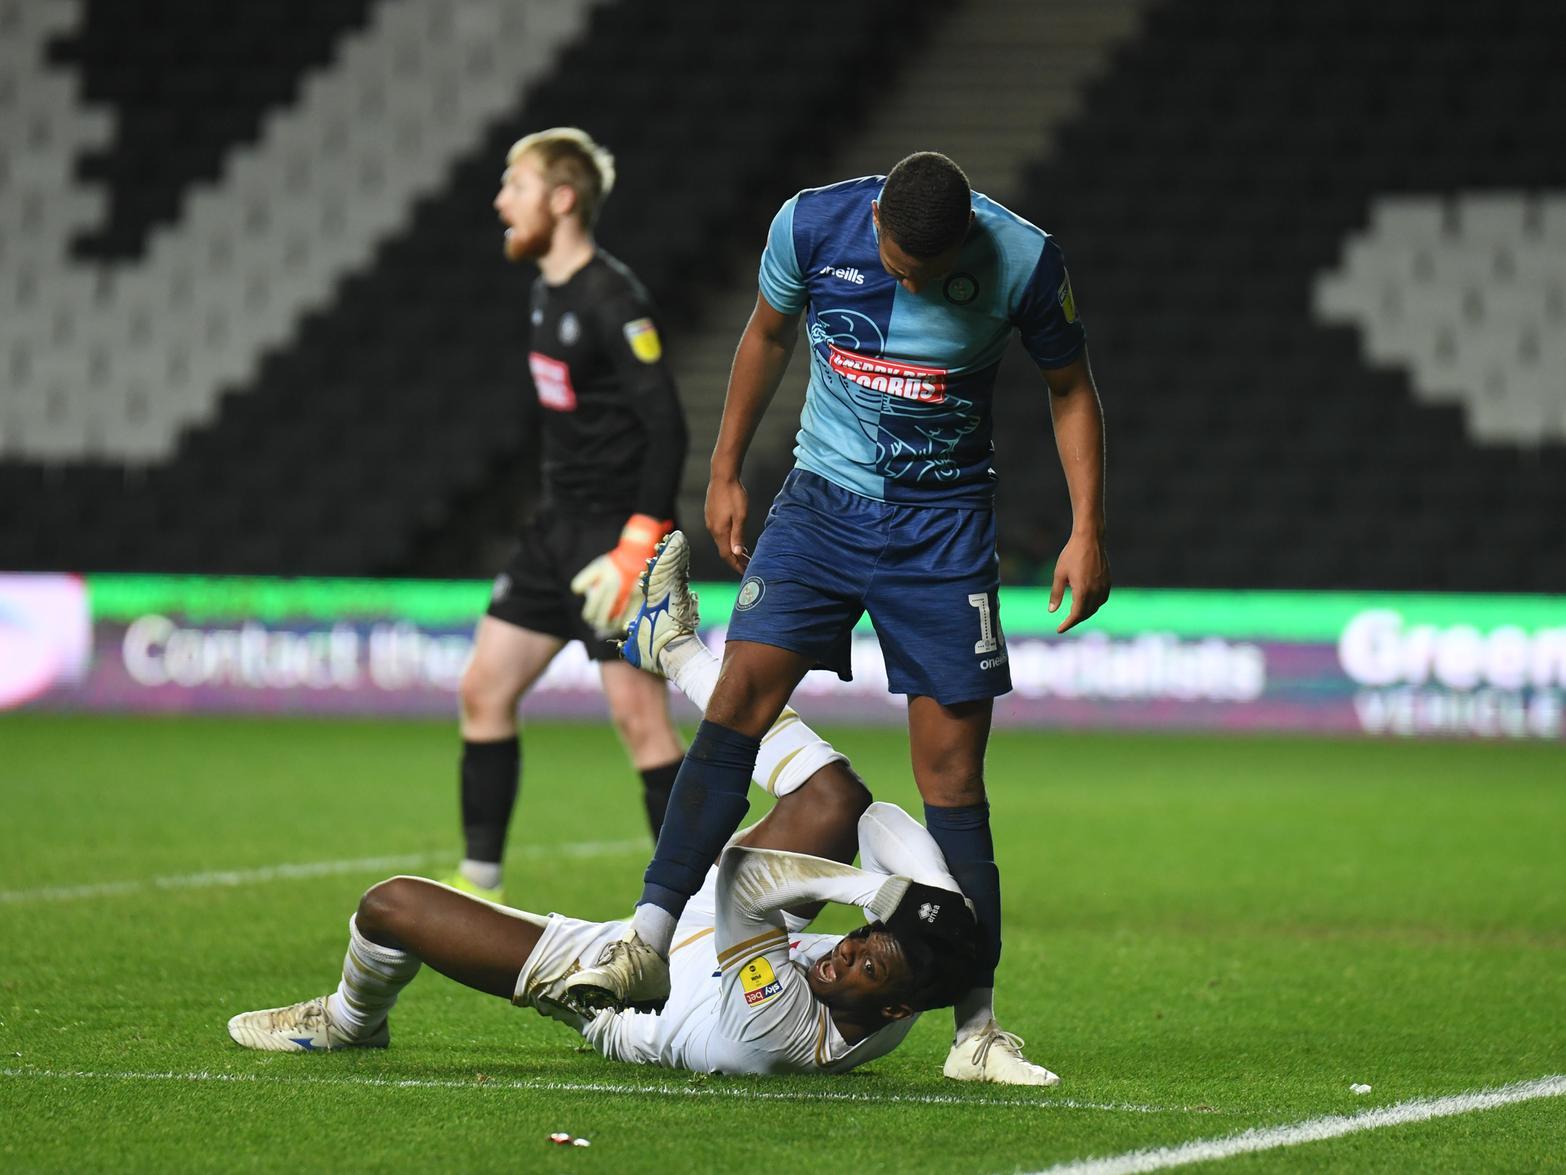 Agard floored by Giles Phillips, who too was sent off